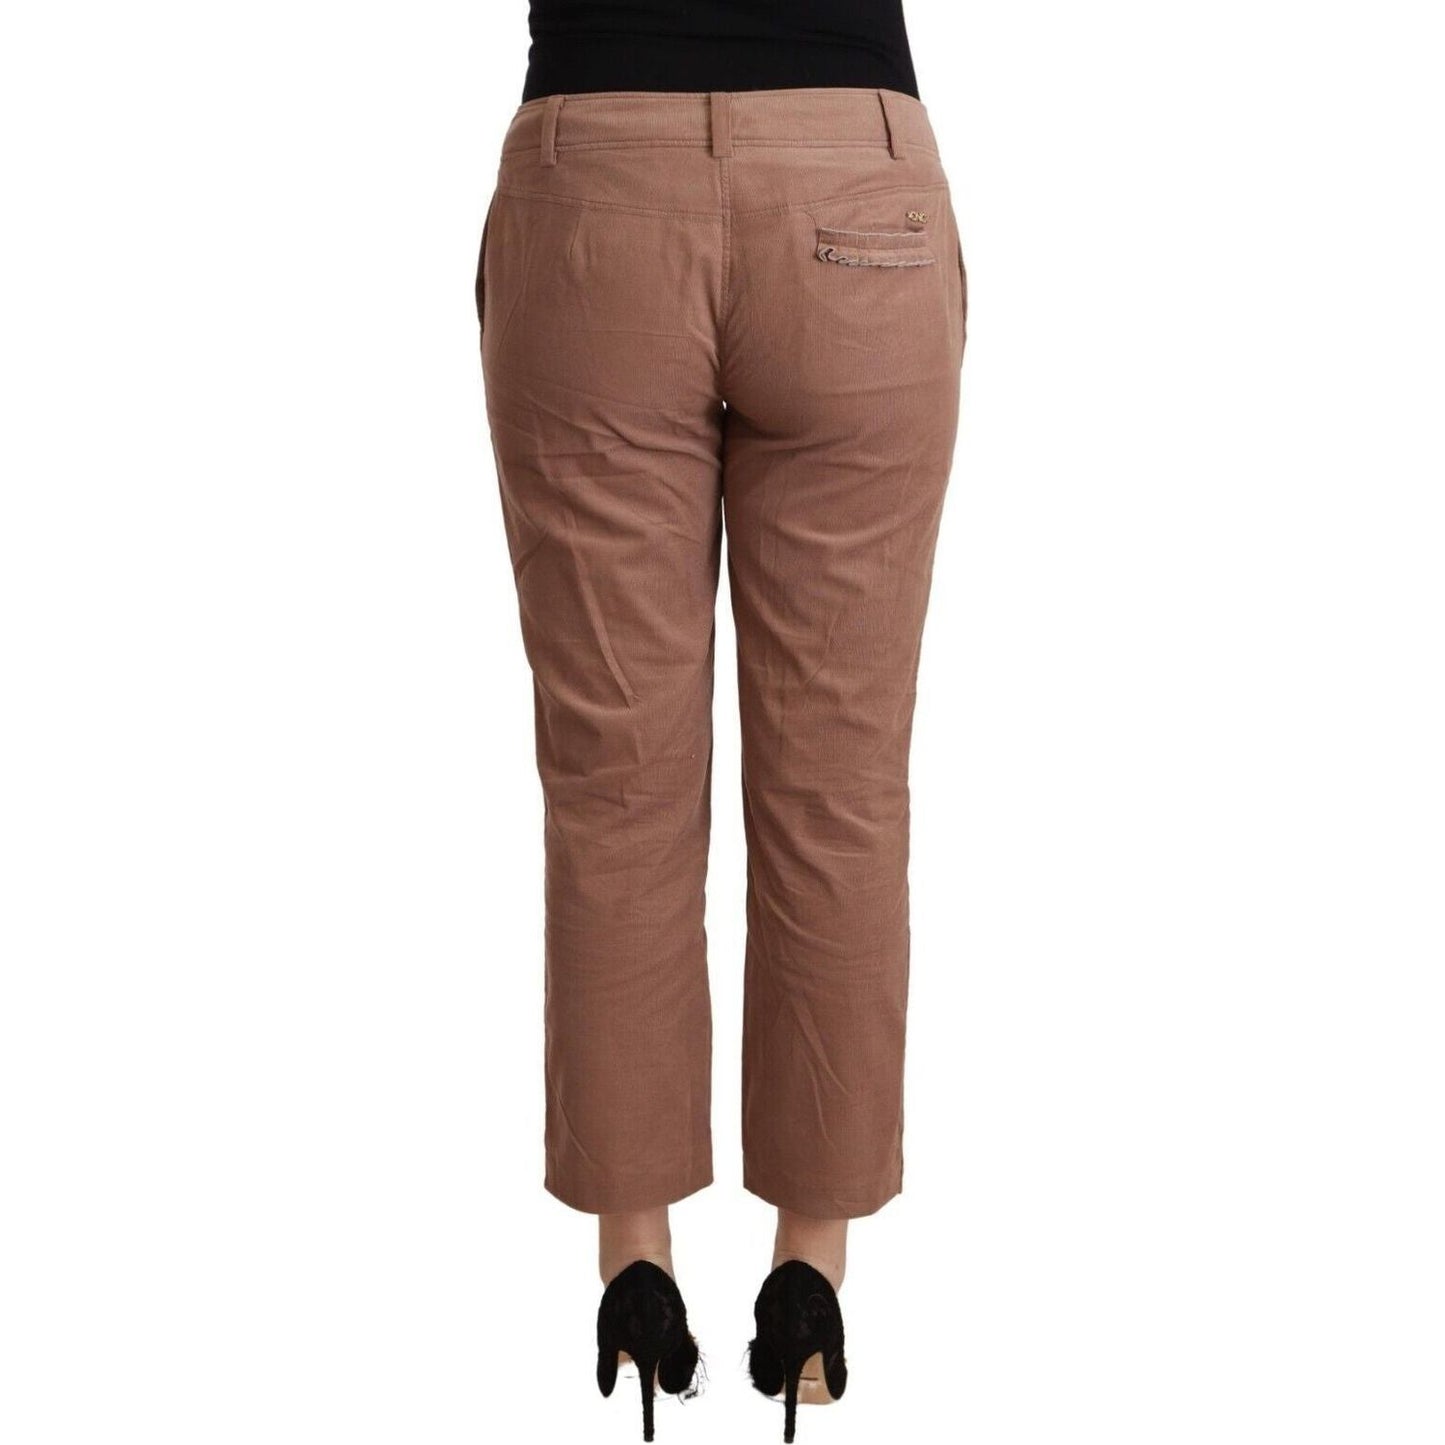 Costume National Chic Tapered Cropped Mid Waist Pants brown-cotton-tapered-cropped-pants